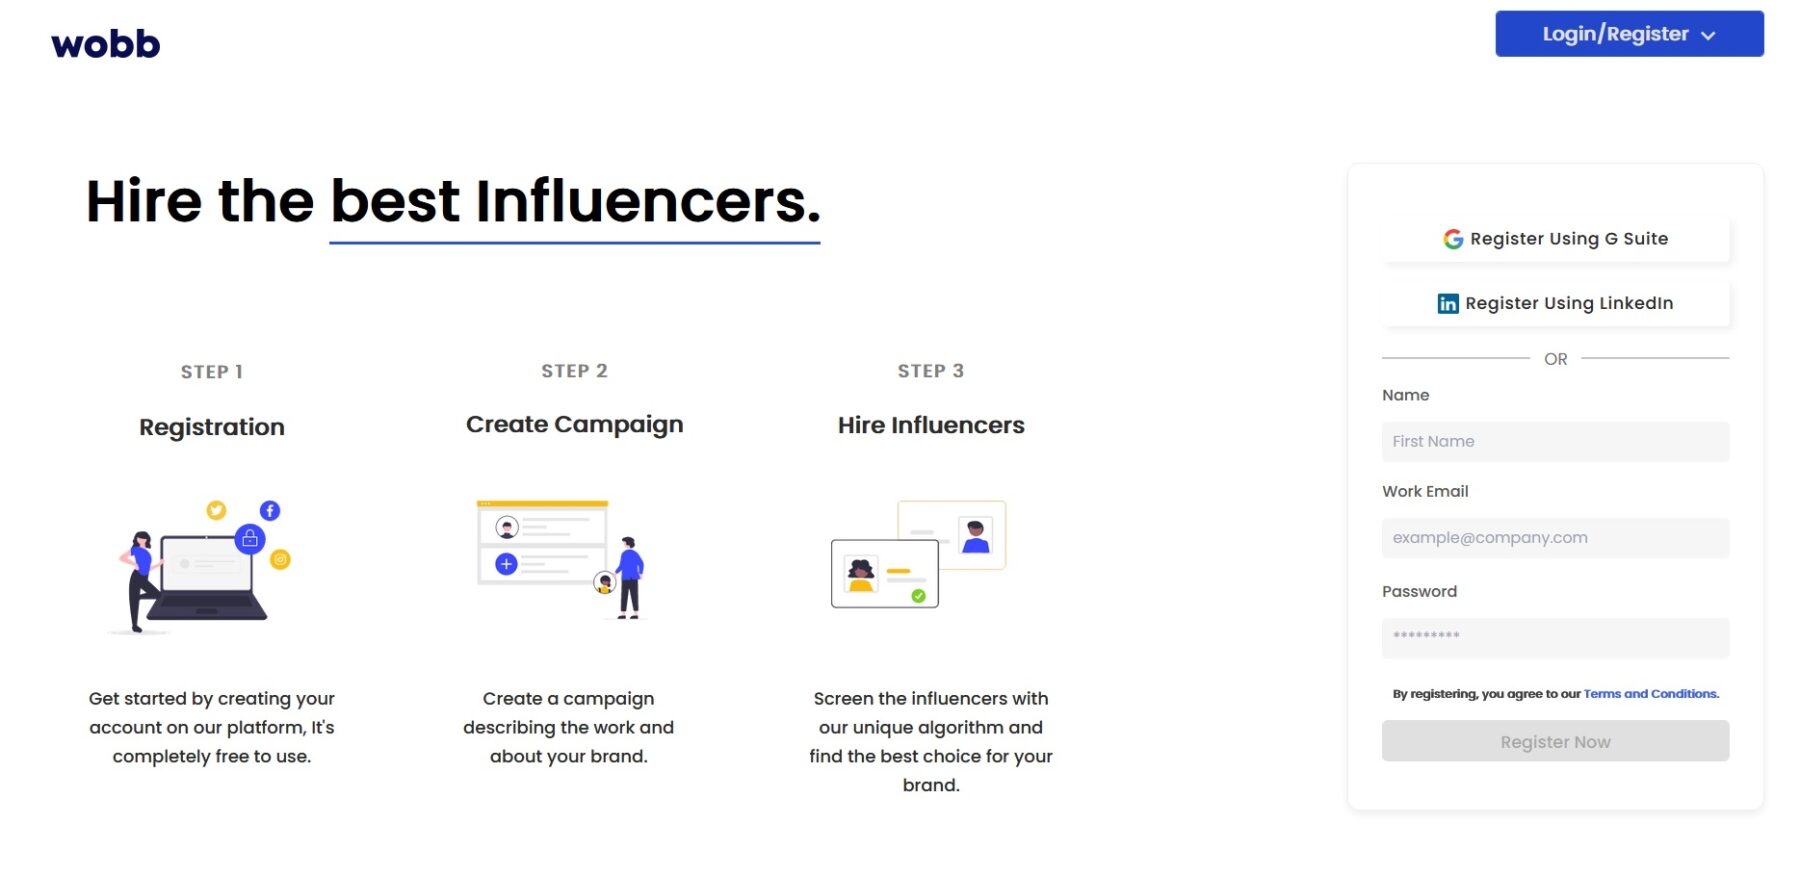 Hire Influencers on Wobb